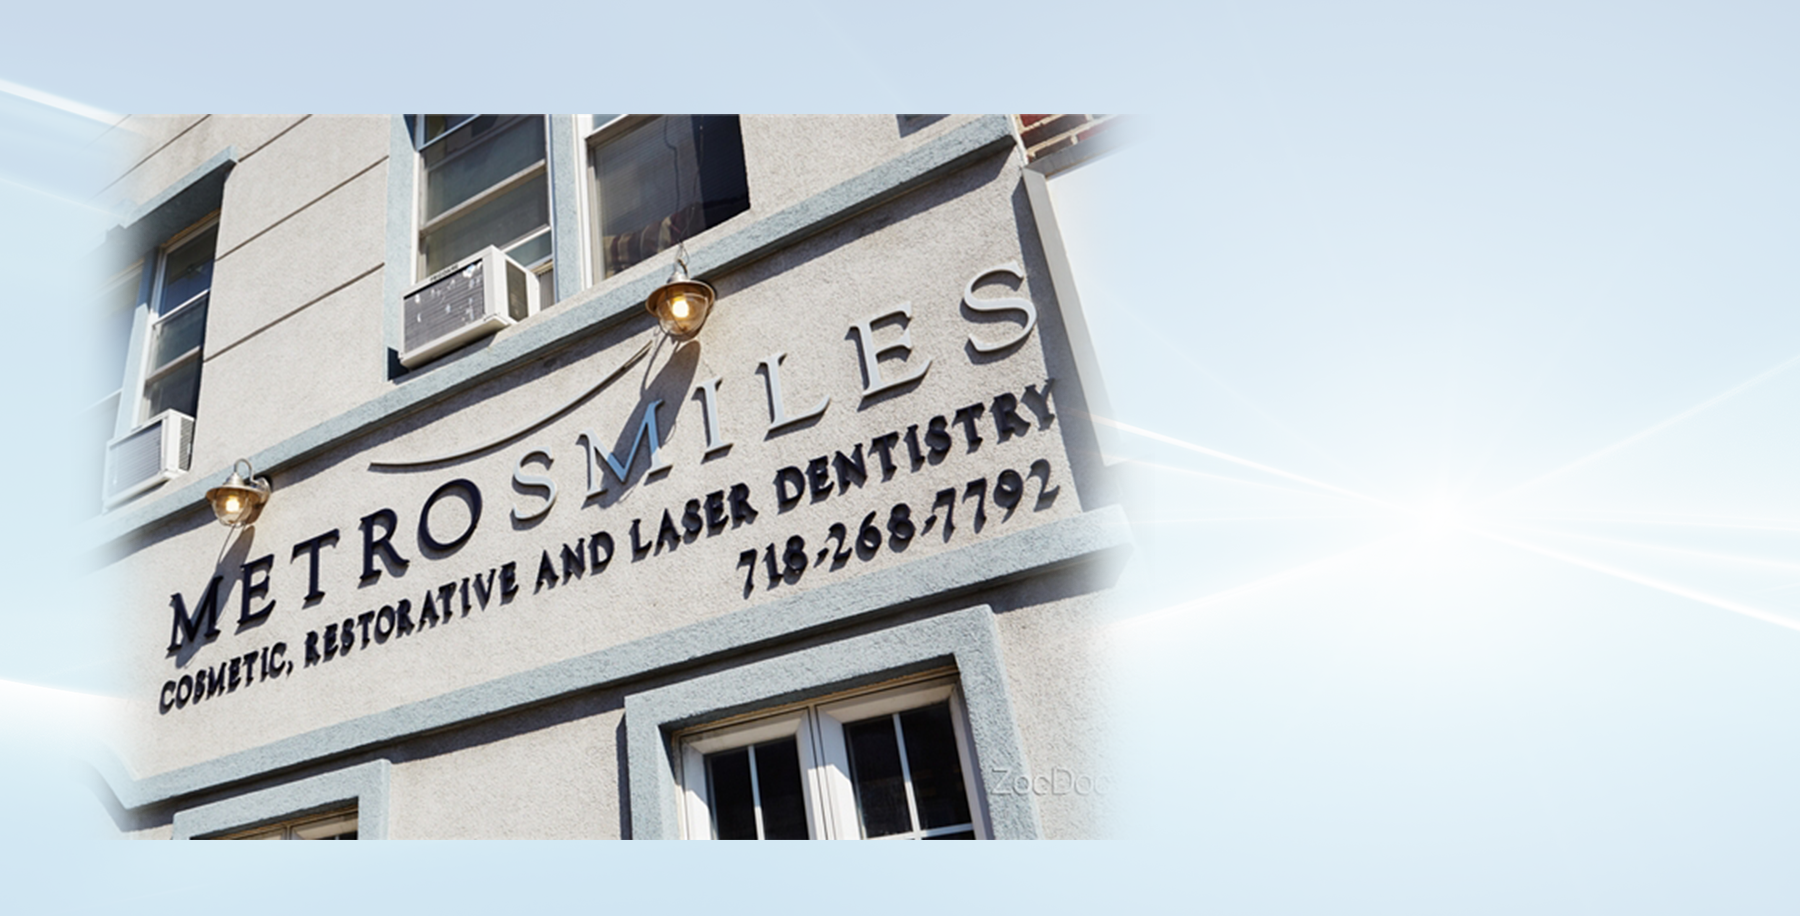 Family Dentist: Easy to Find